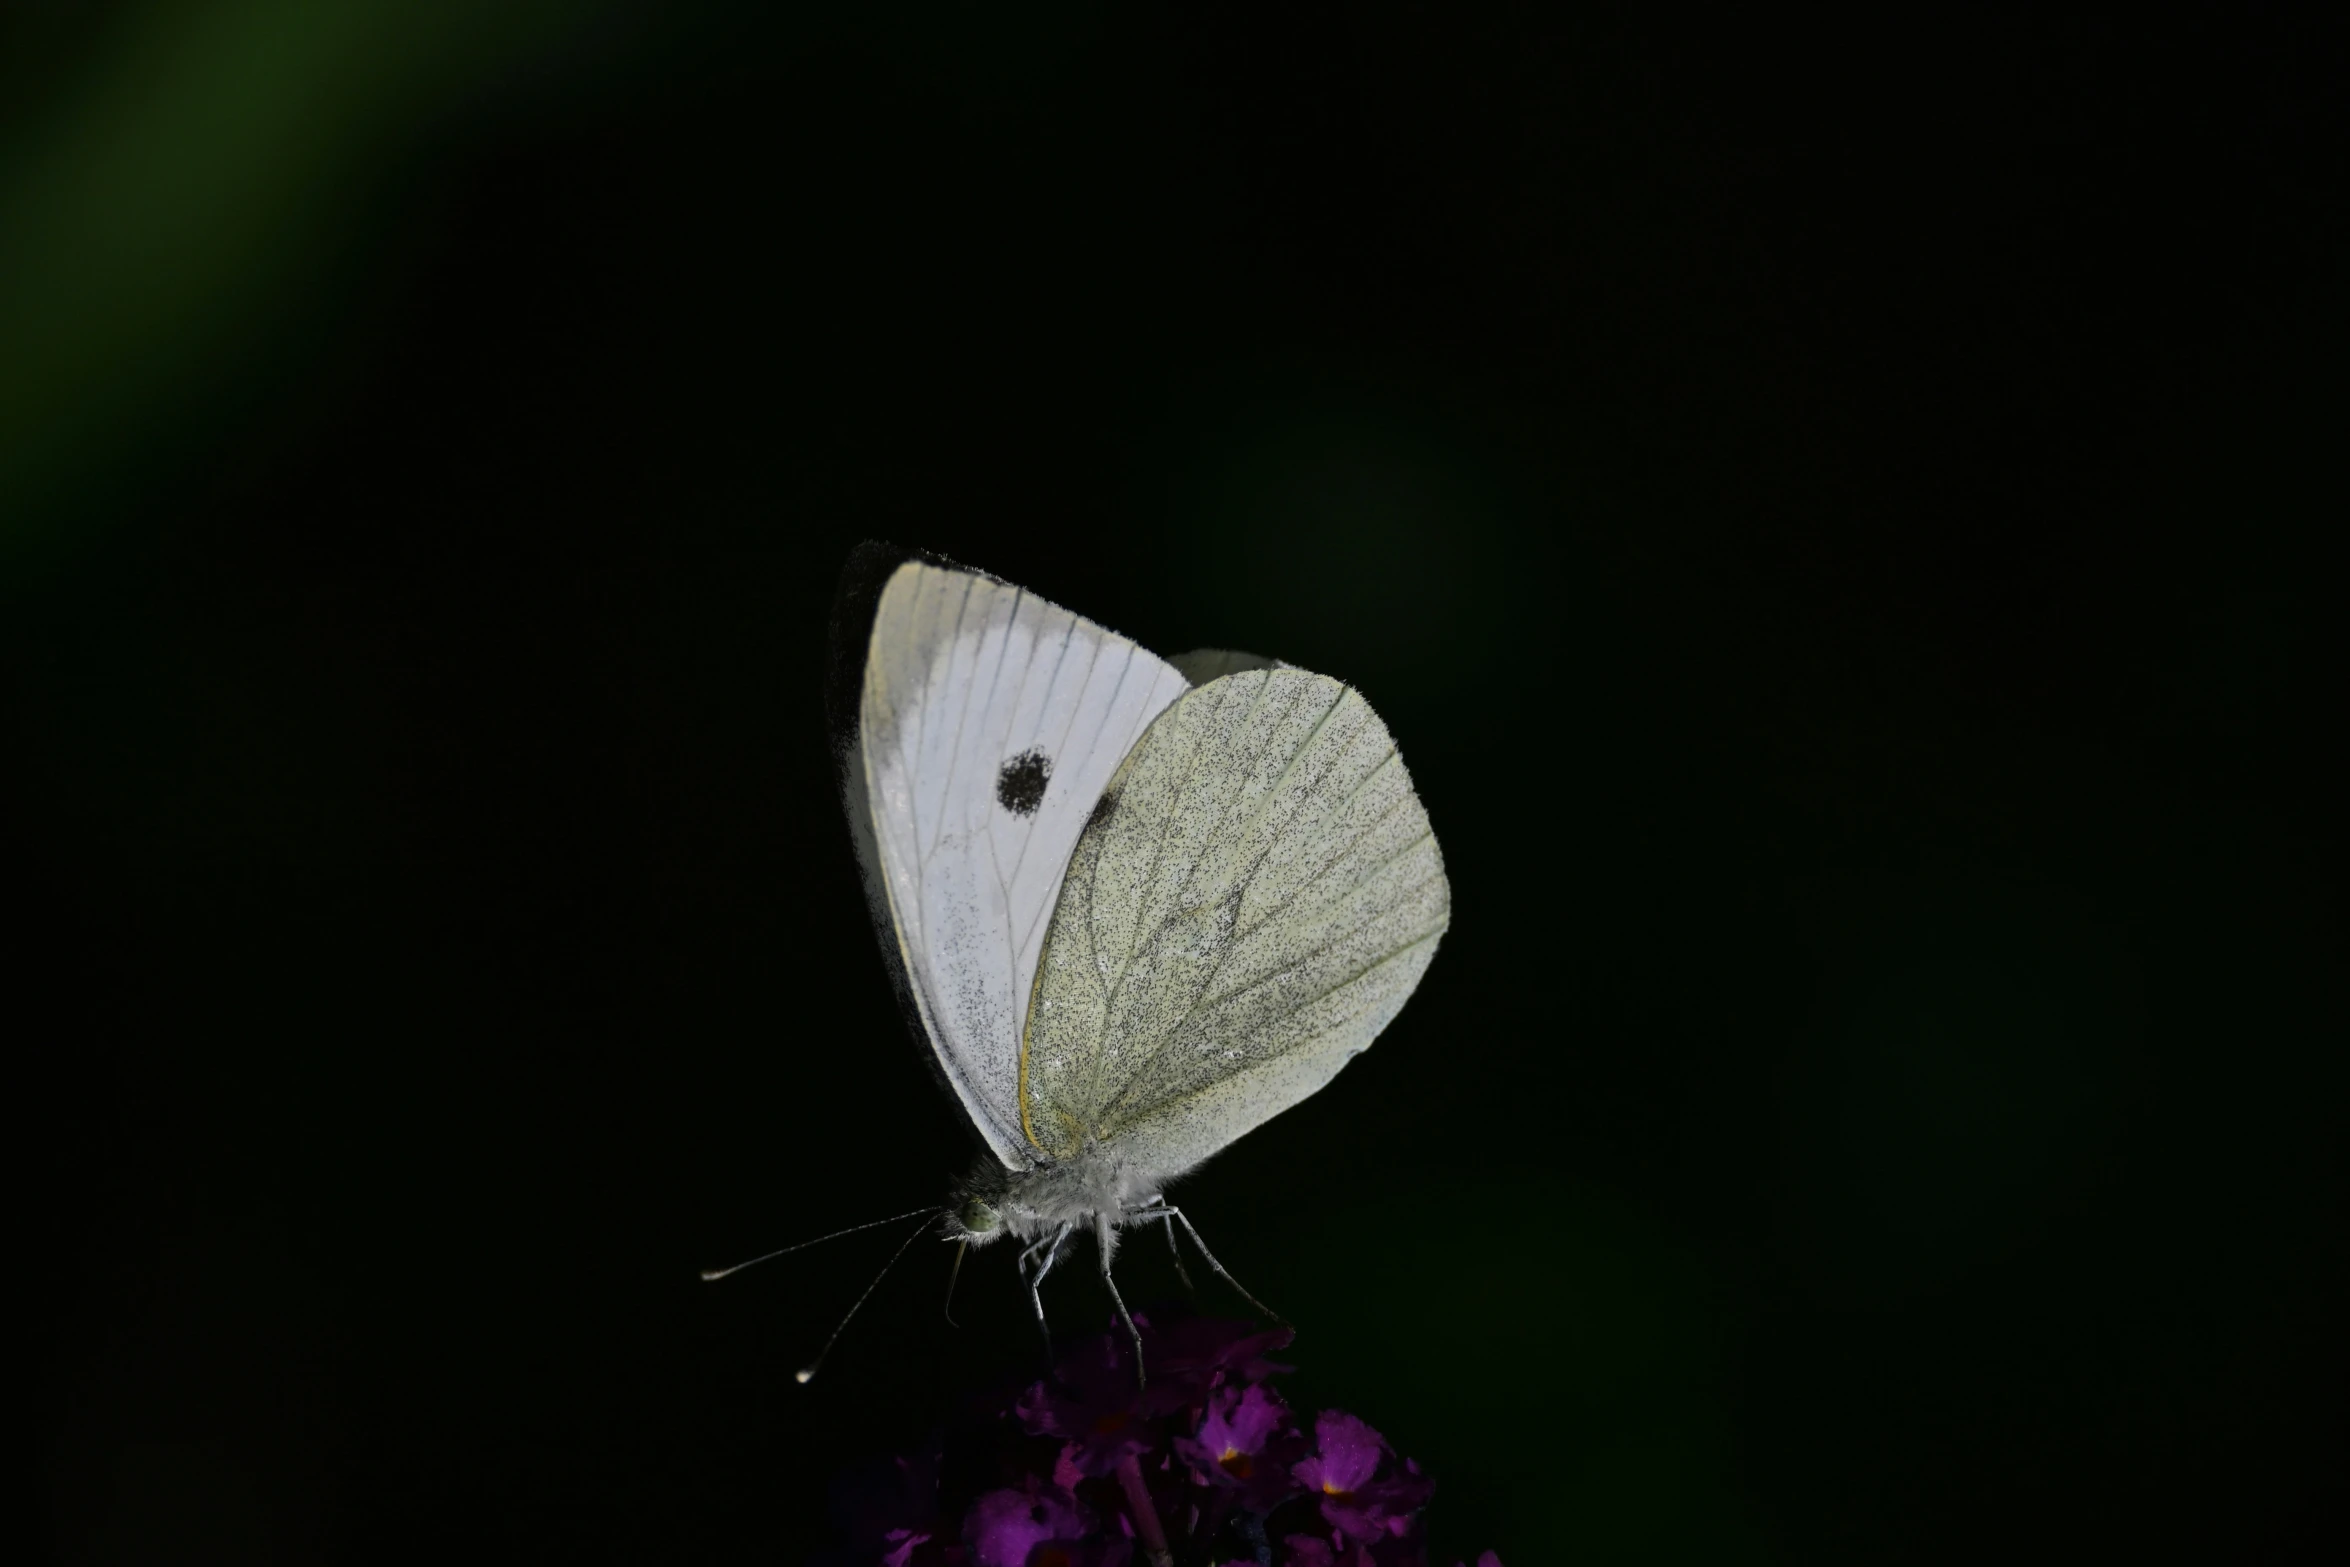 the erfly is sitting on the small purple flower